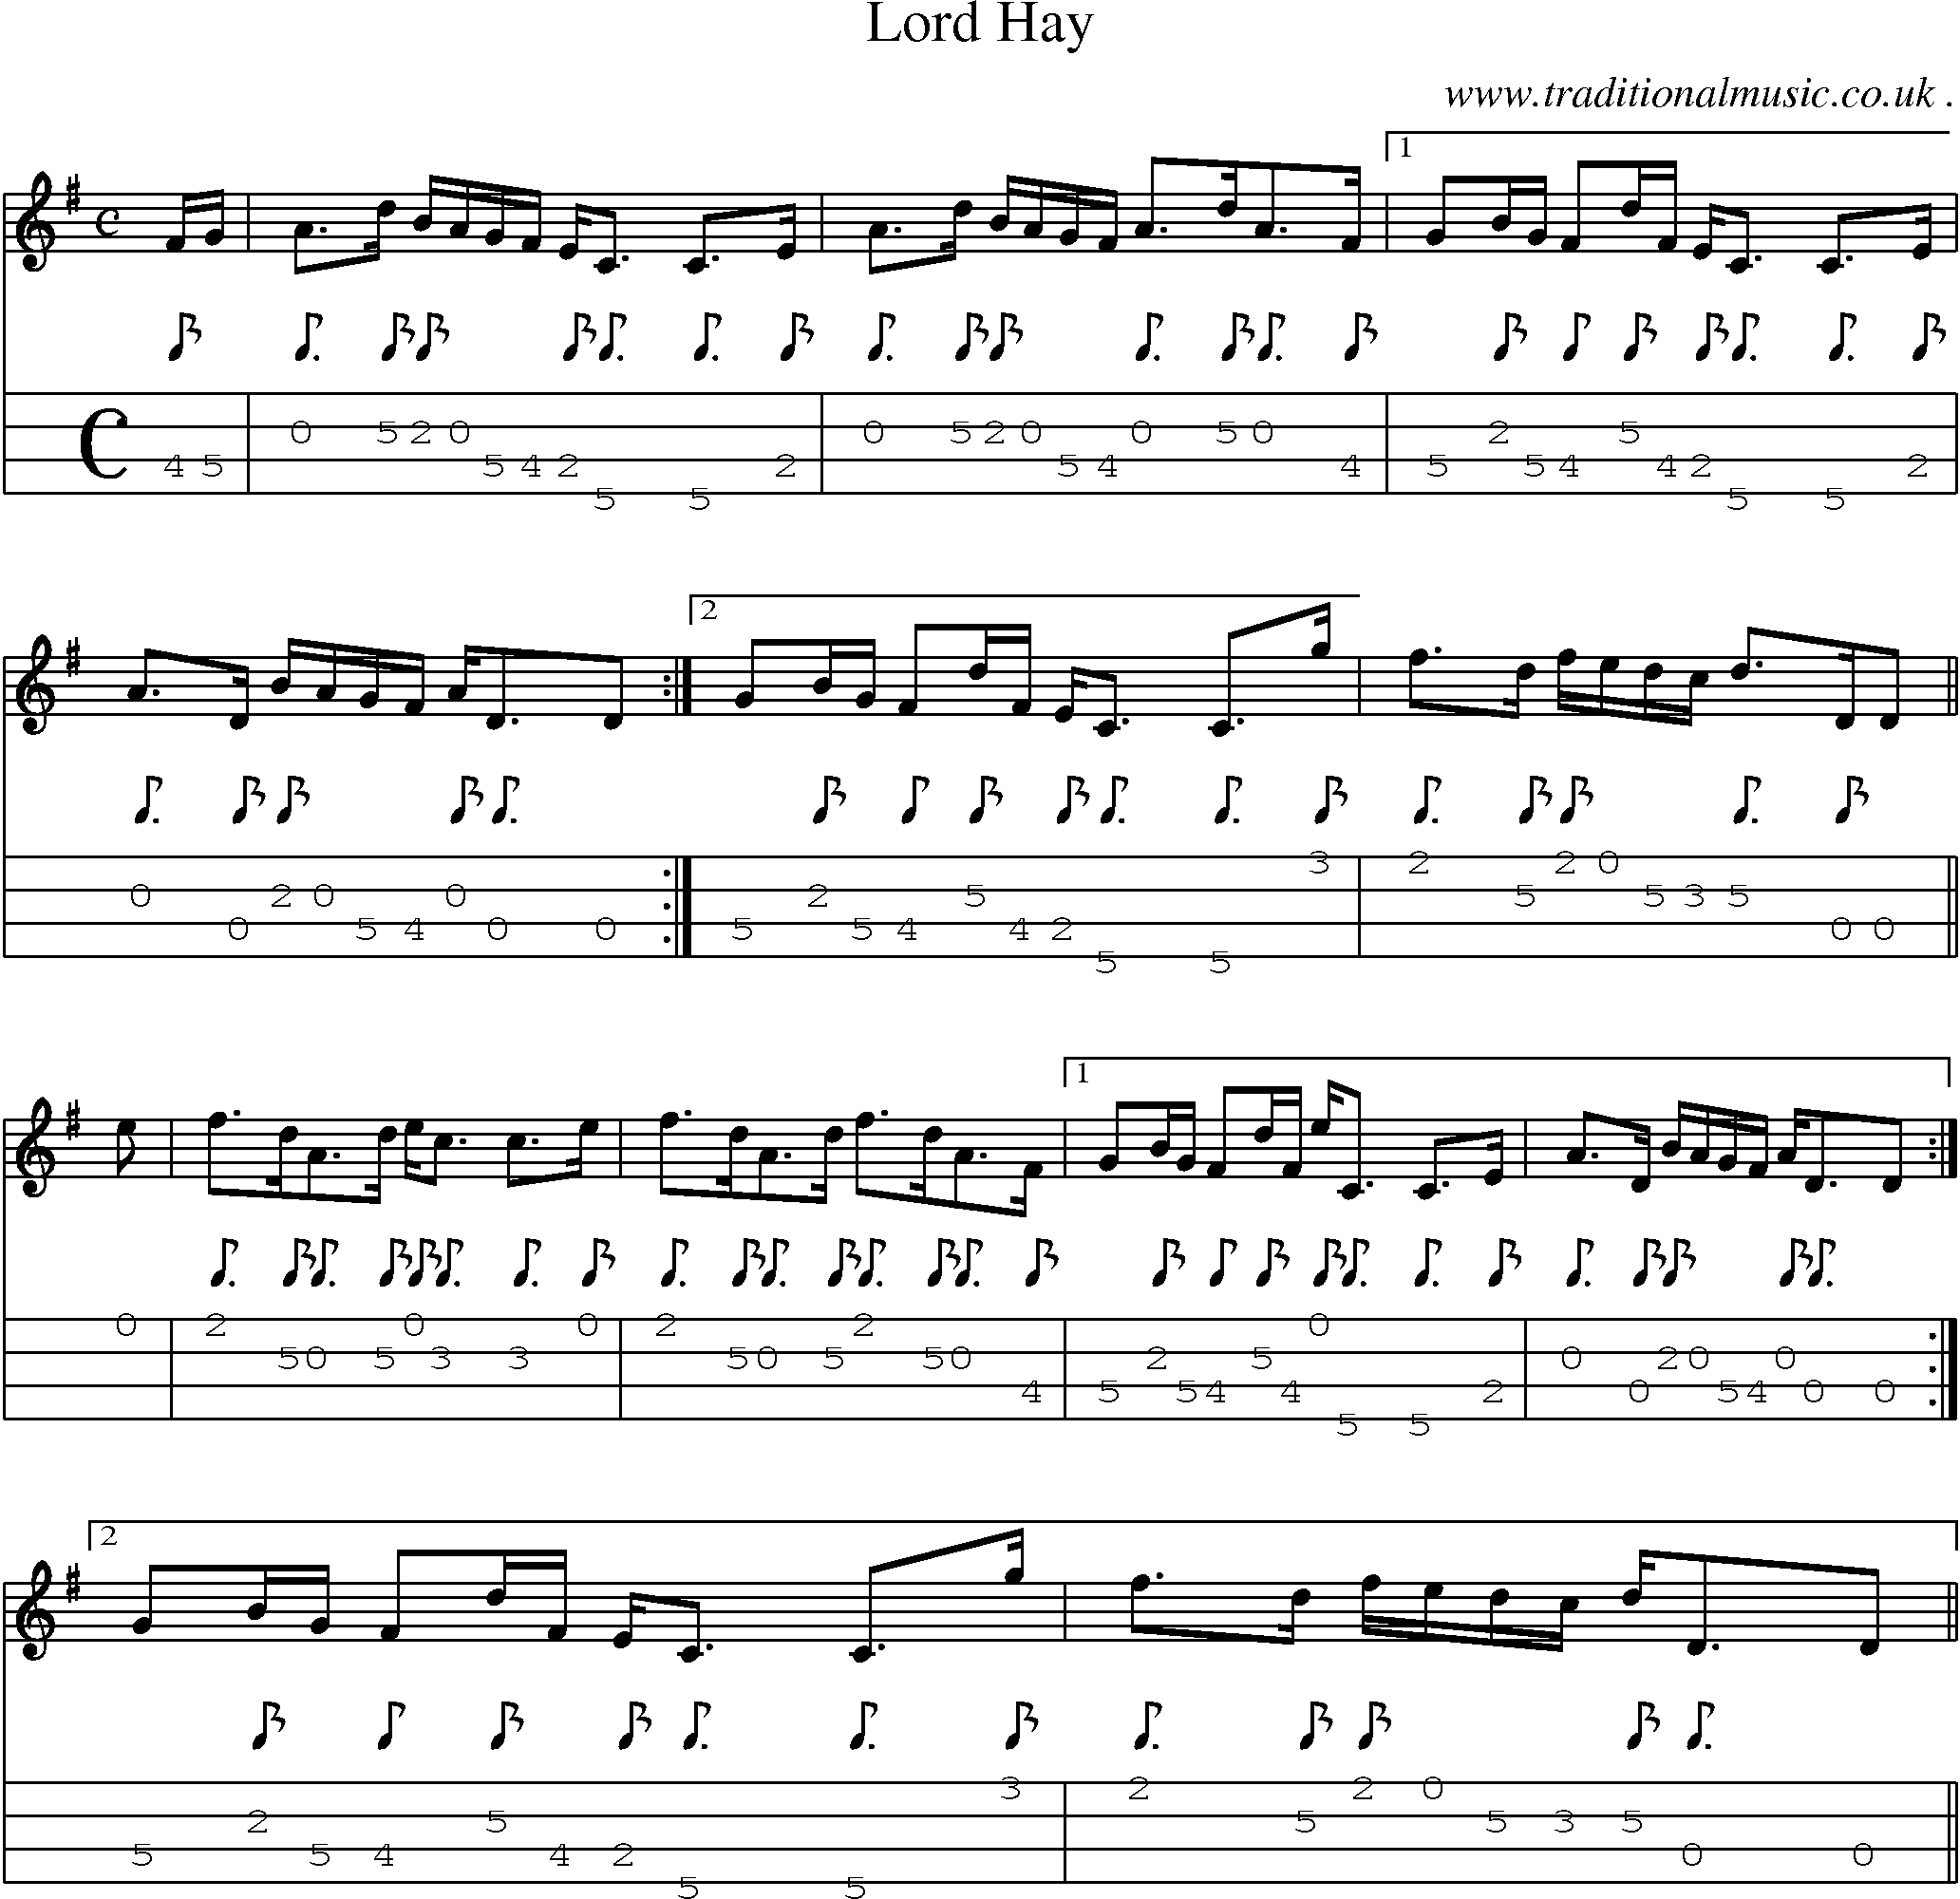 Sheet-music  score, Chords and Mandolin Tabs for Lord Hay